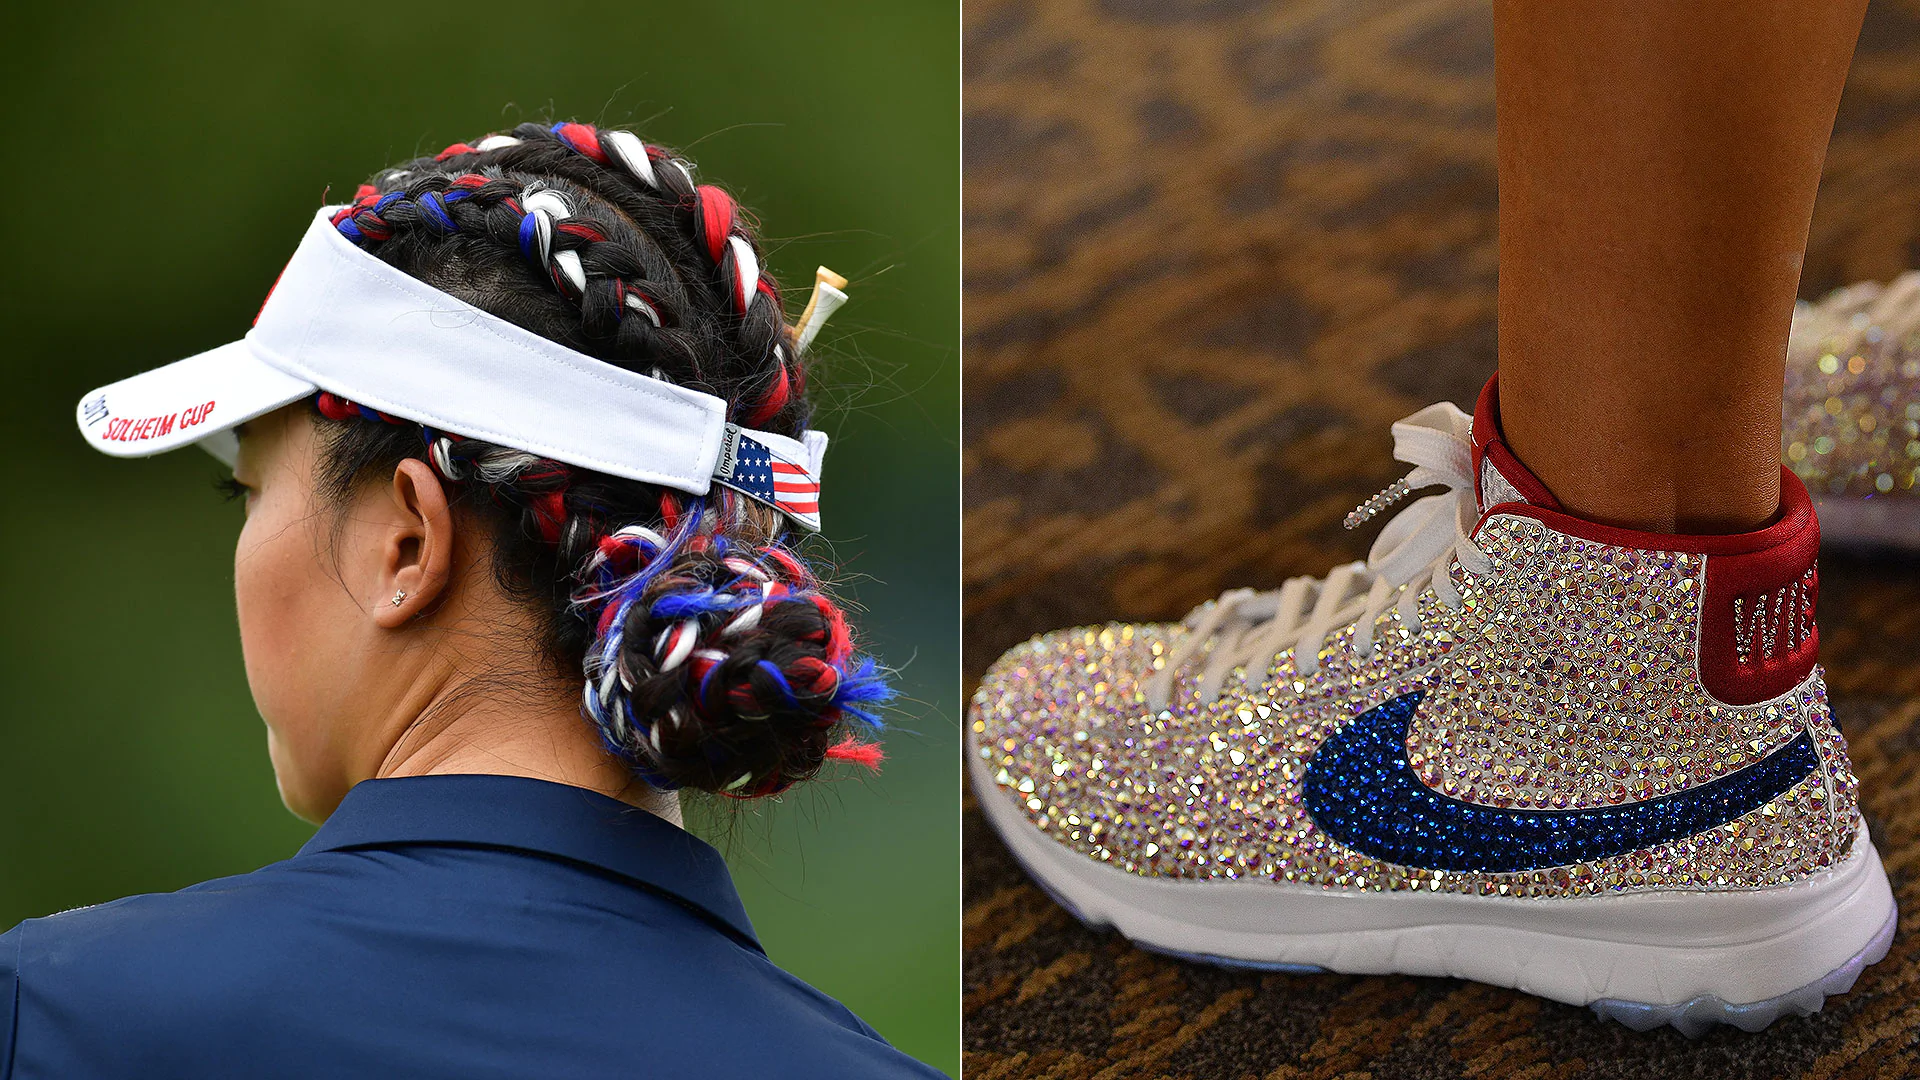 Wie embracing Solheim Cup spirit with hair, shoes